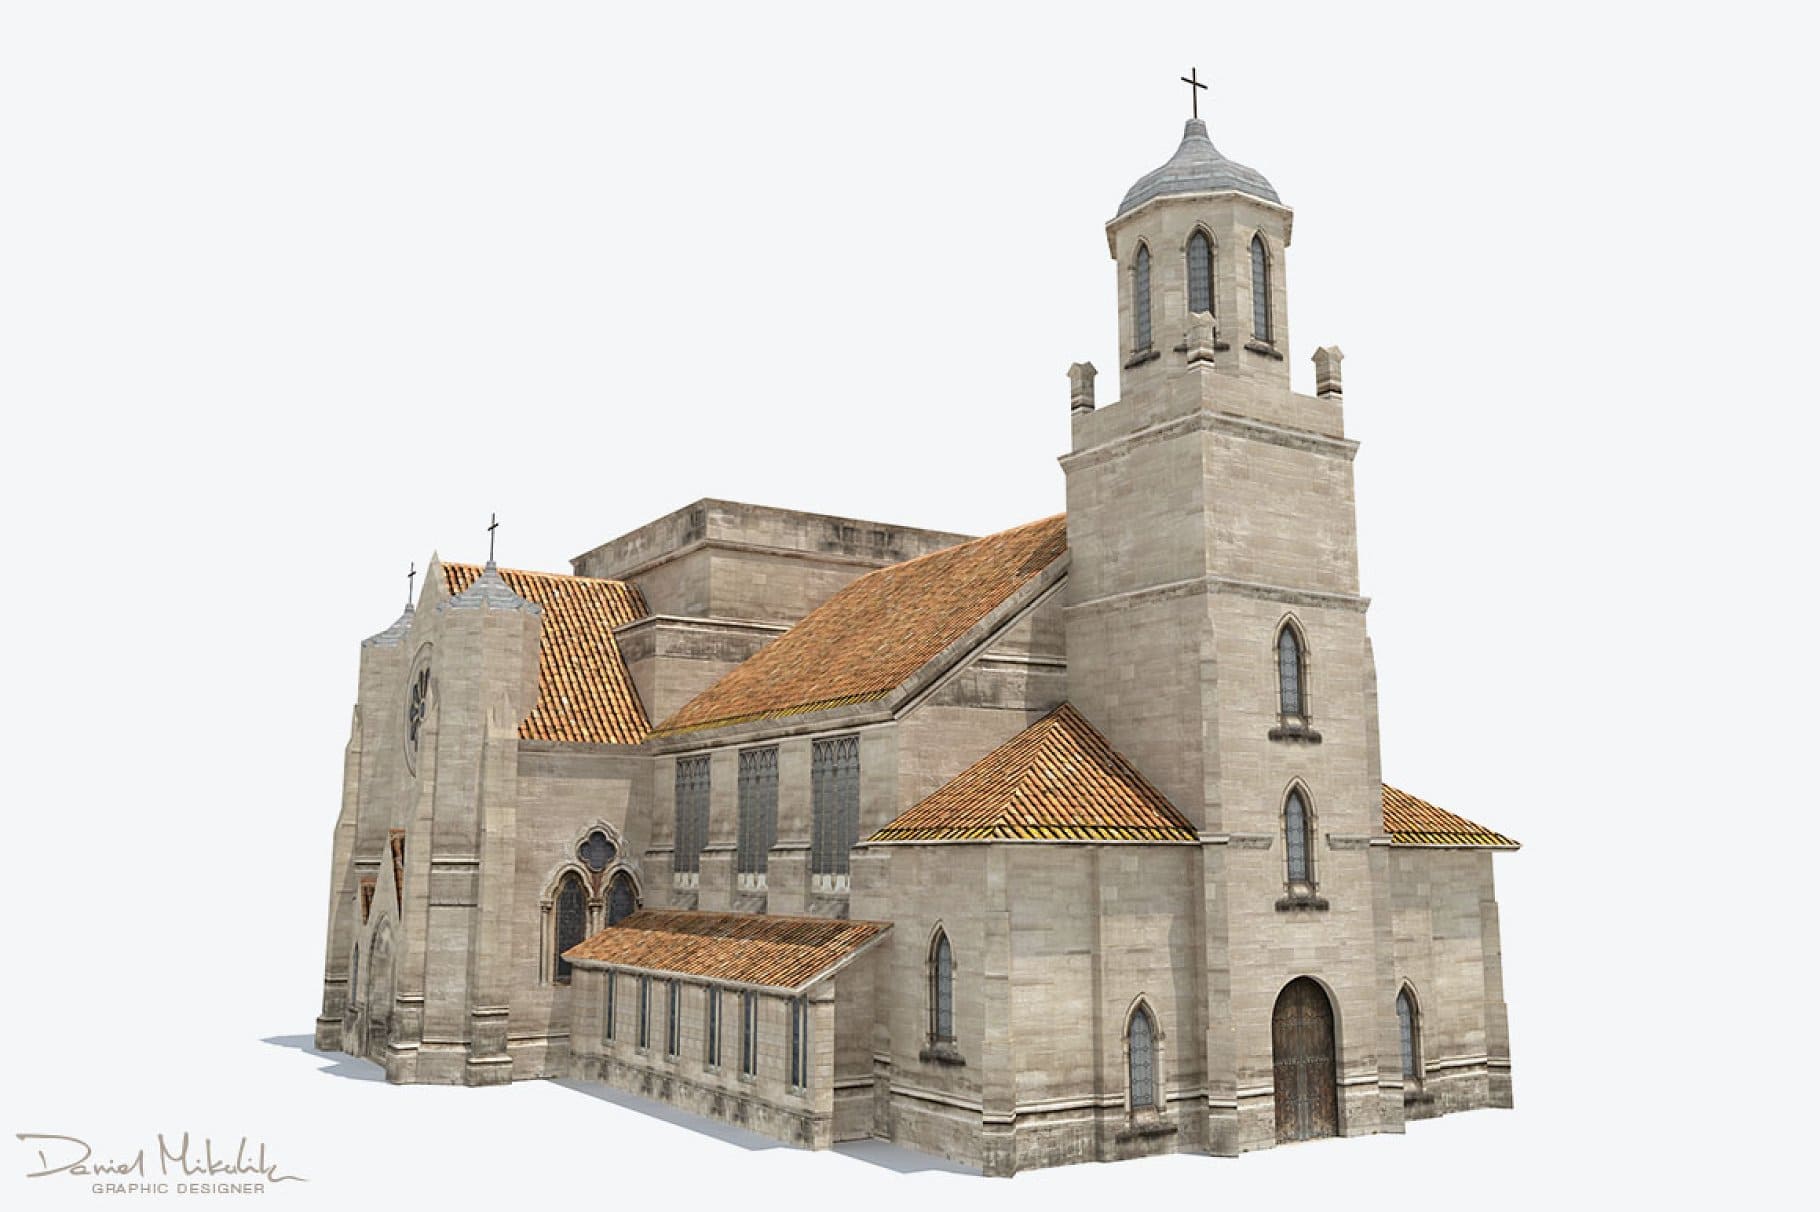 3D model of an ancient church with a tiled roof.